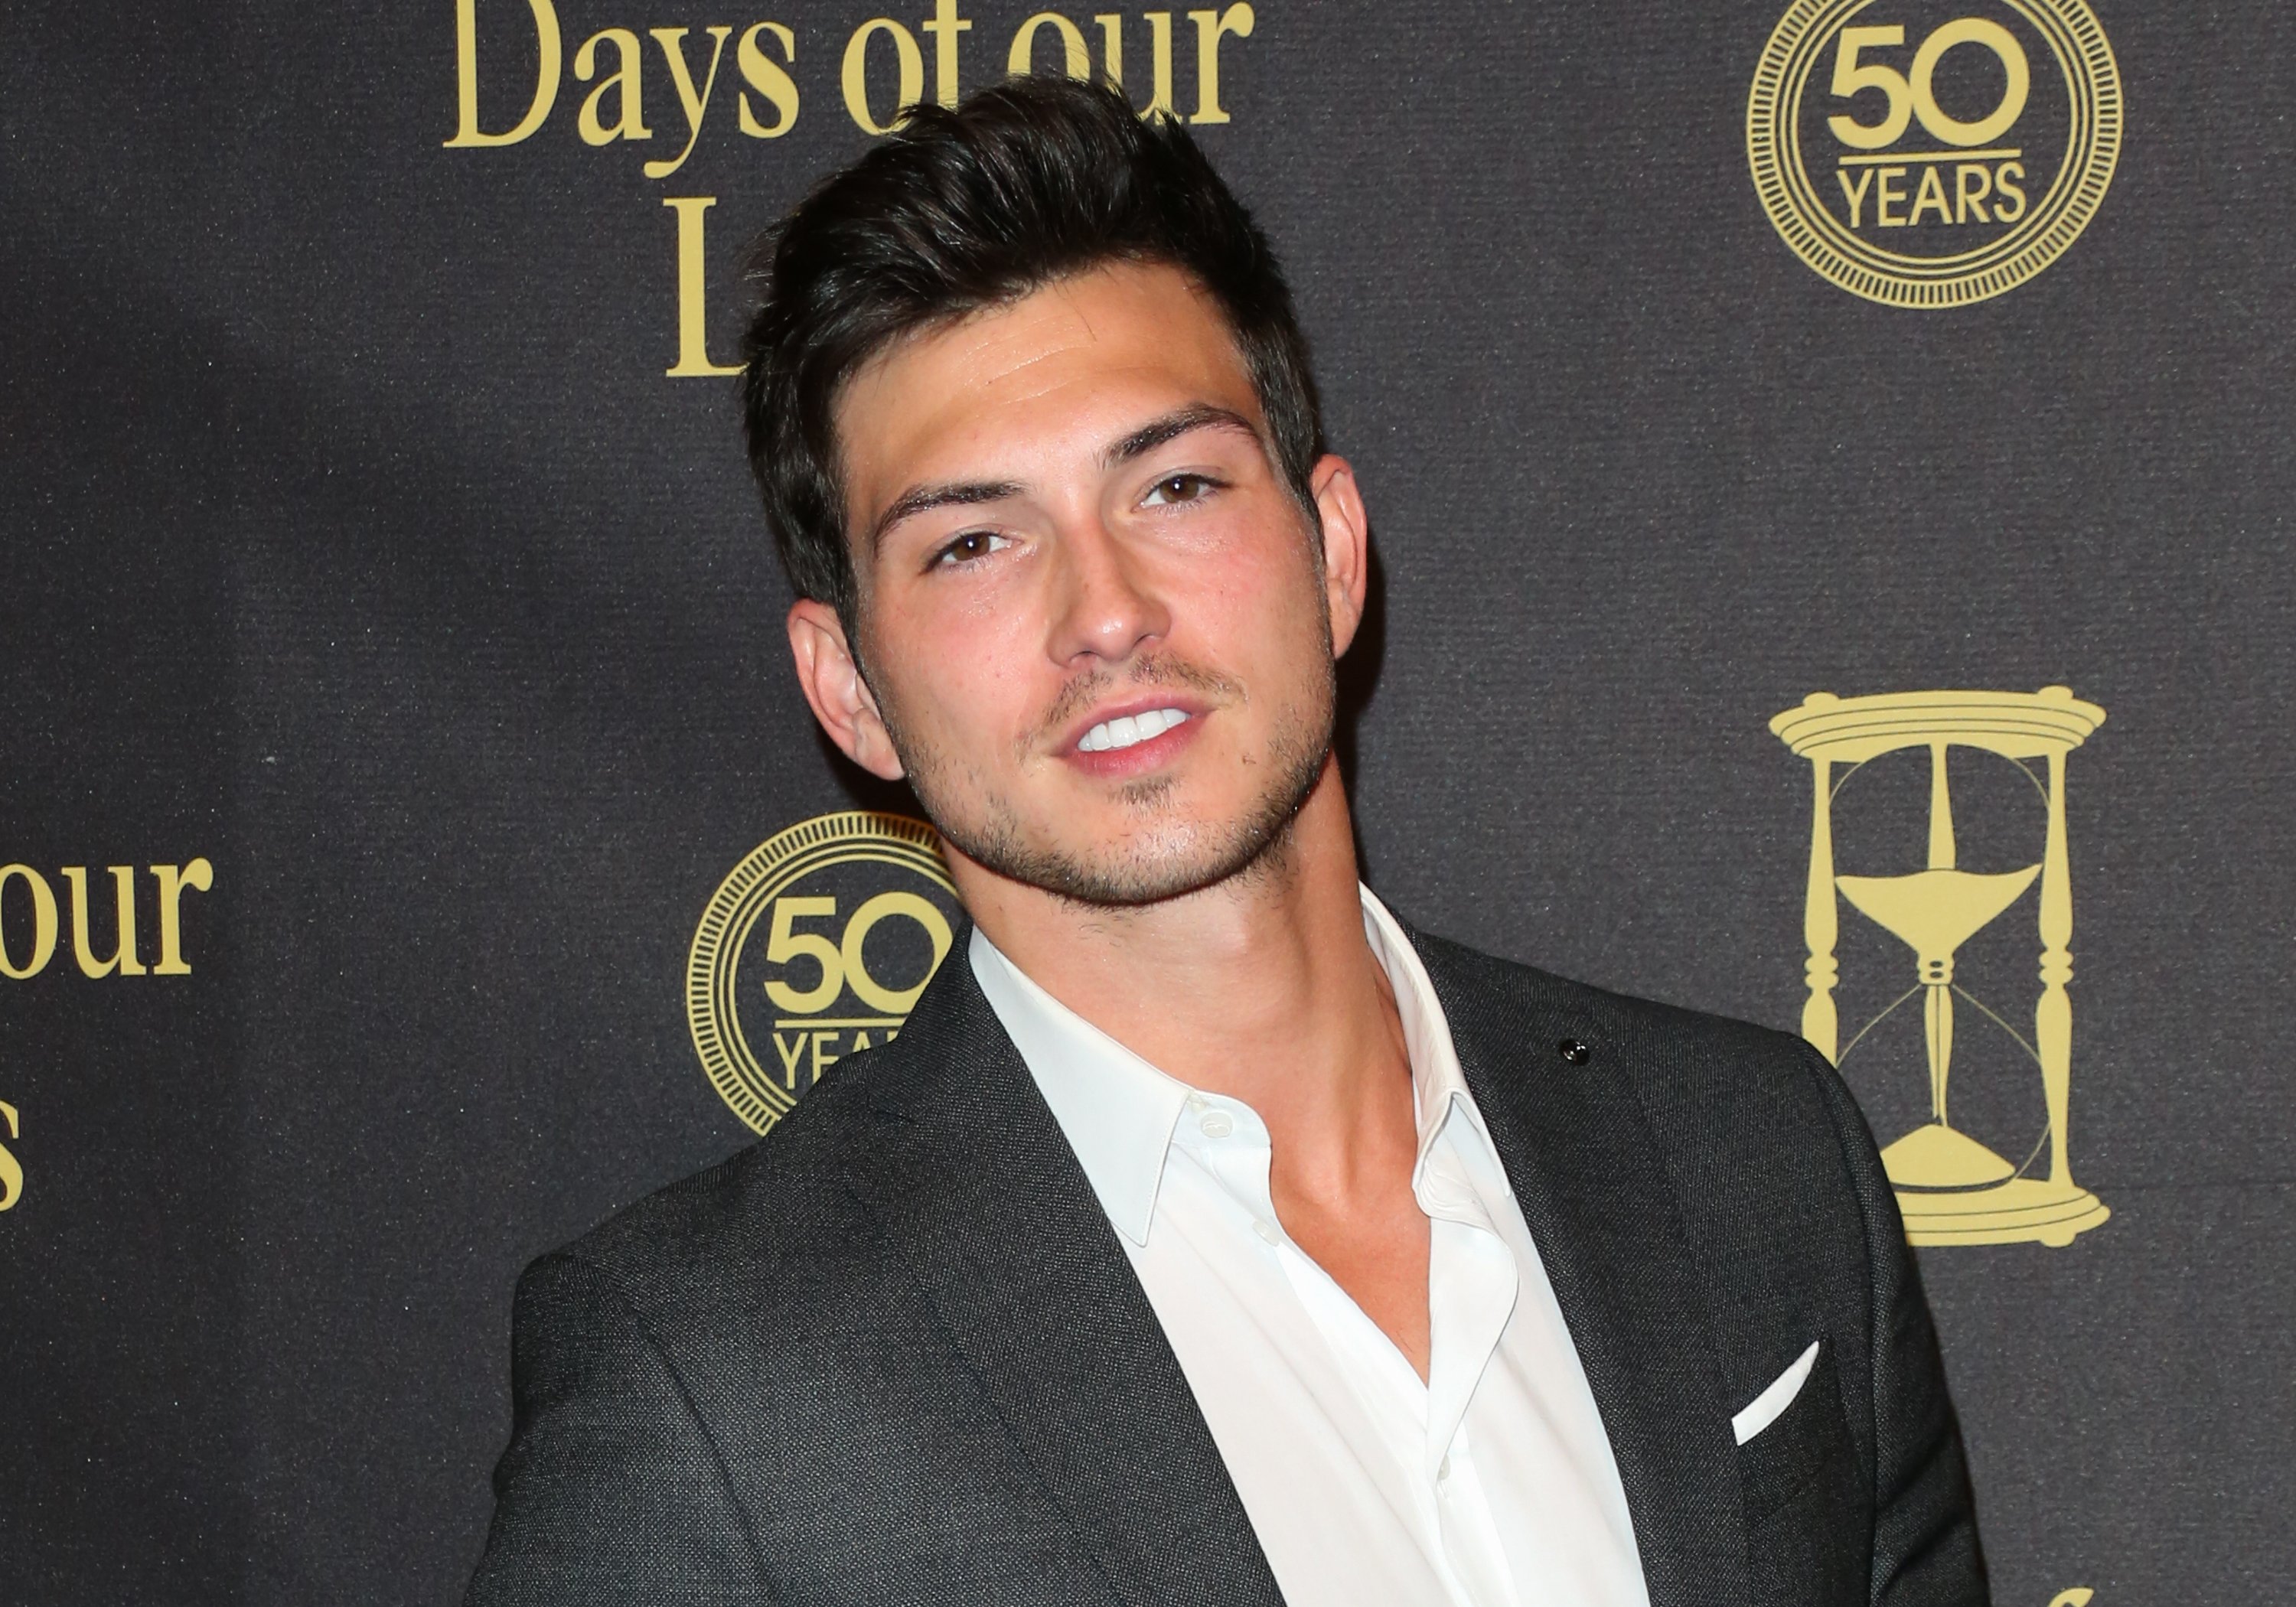 Actor Robert Scott Davis, who plays Alexander on 'Days of Our Lives,’ poses in a gray suit and white shirt.
